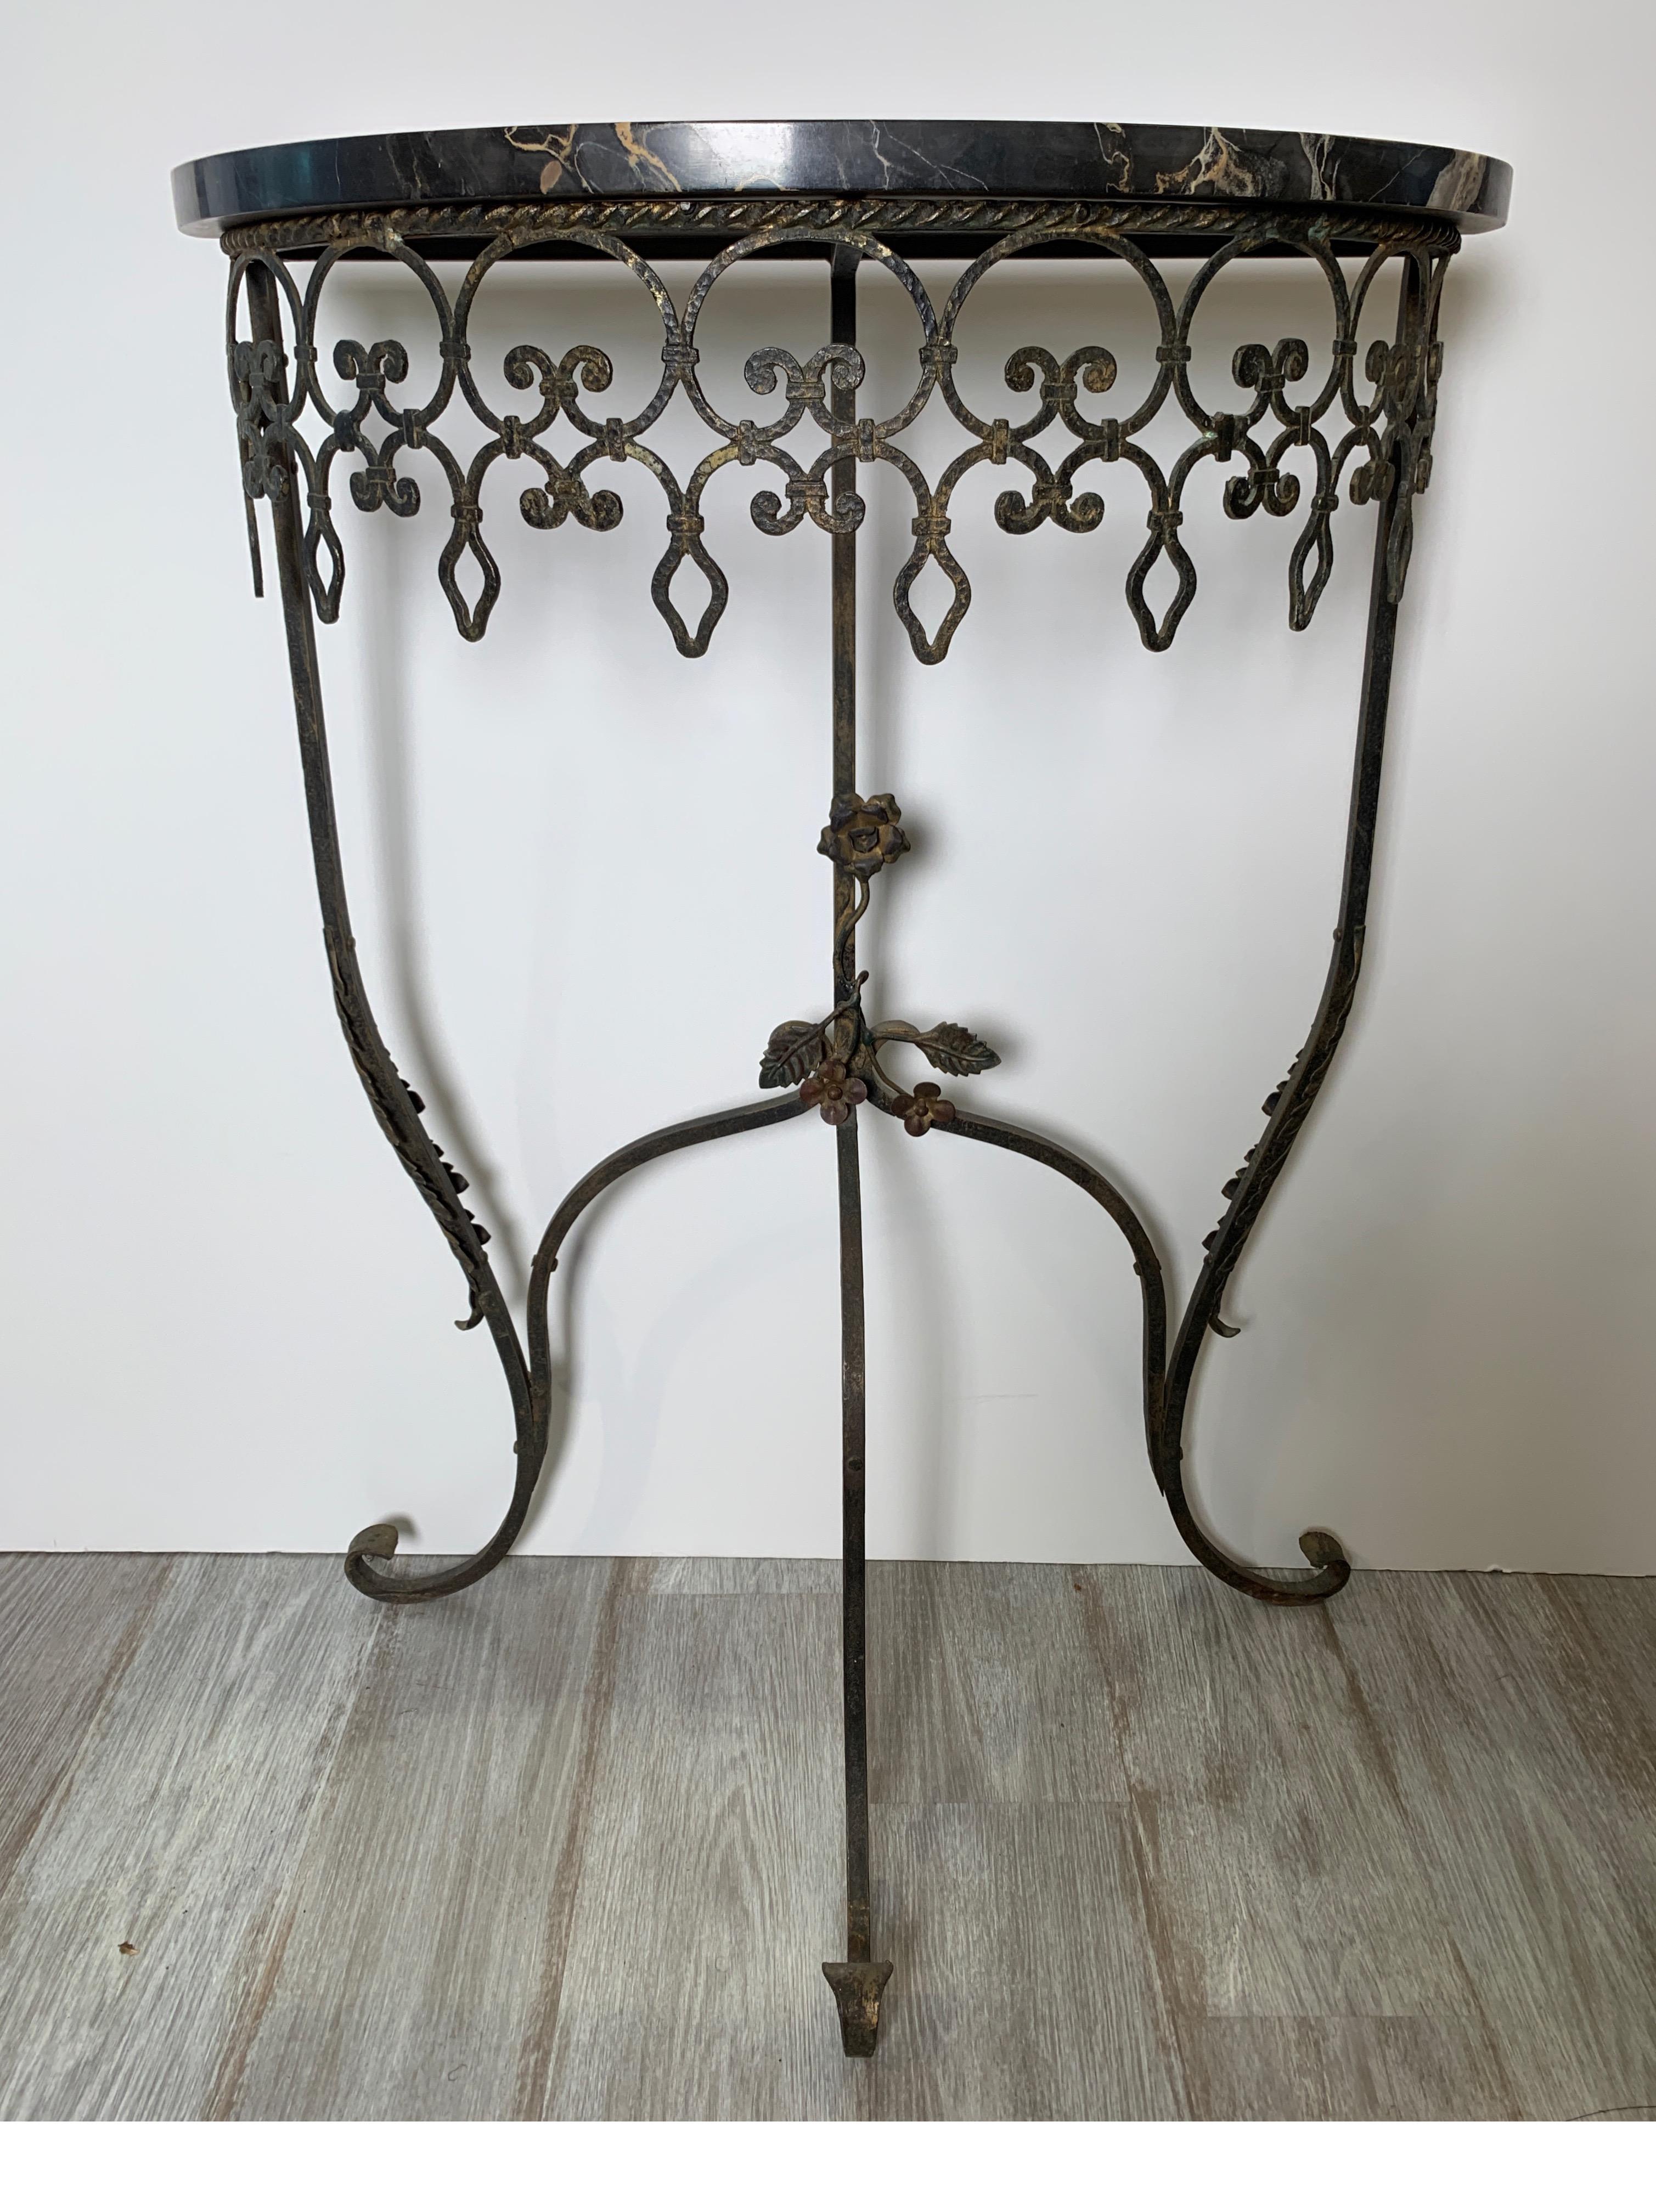 1930s wrought iron marble top half round console table. The iron base, with naturally aged finish with a black demilune marble top, early 20th century.
   